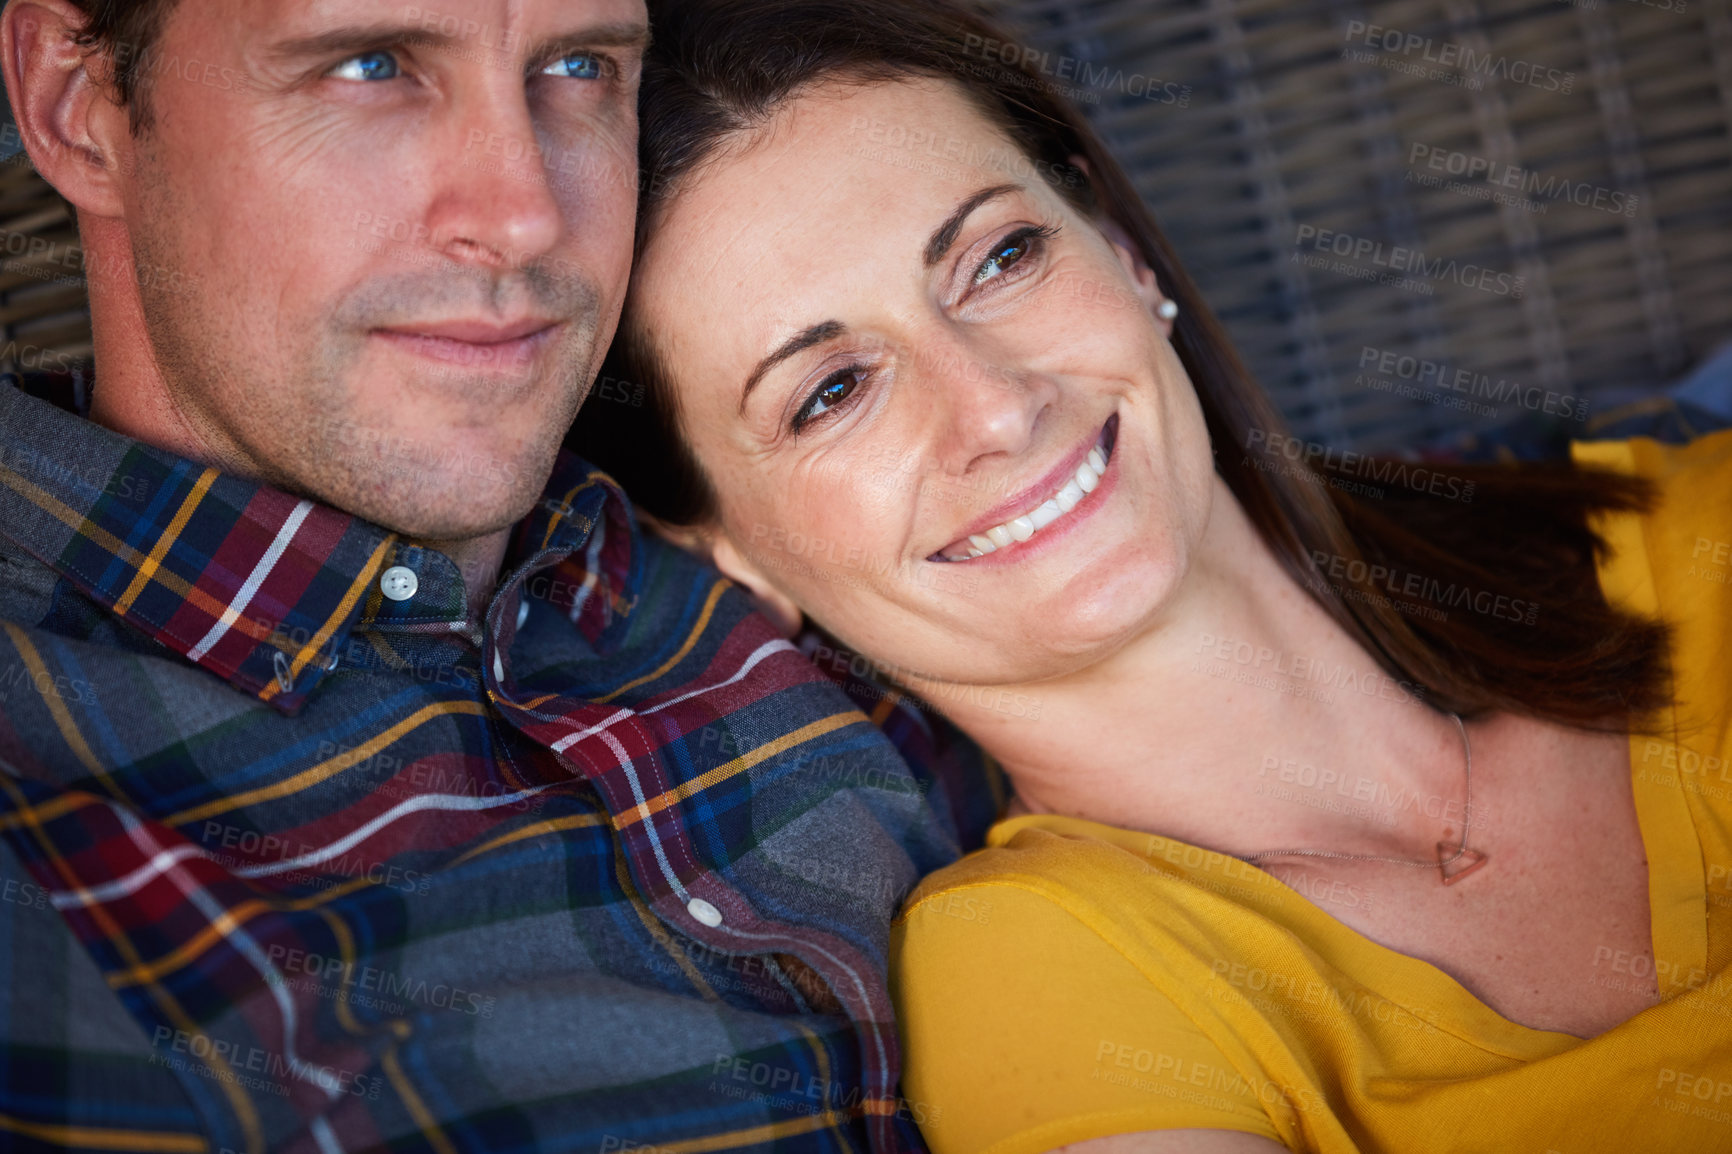 Buy stock photo Cropped shot of an affectionate couple sitting together